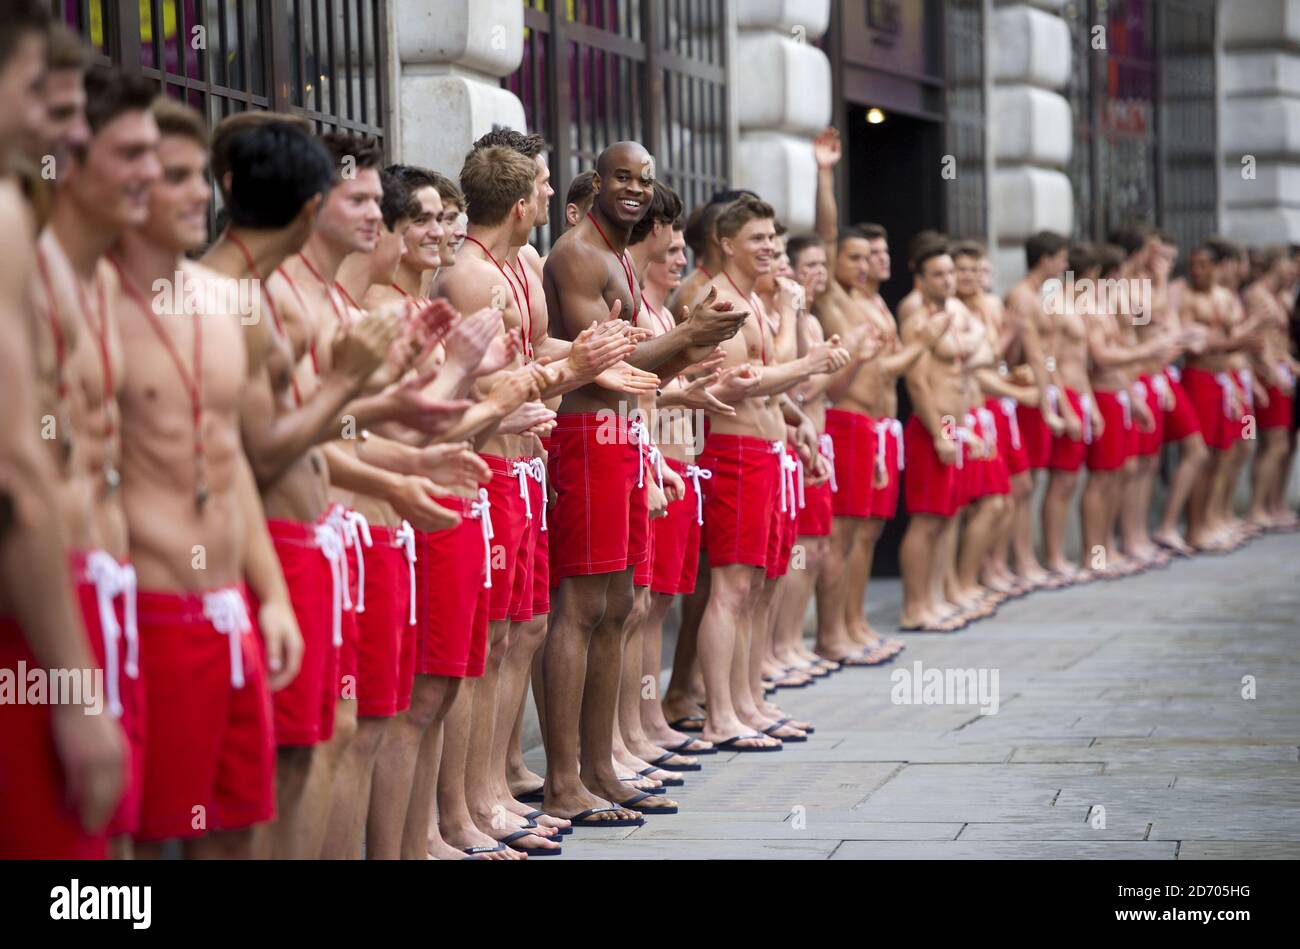 Models dressed as lifeguards pictured as they open the new Gilly